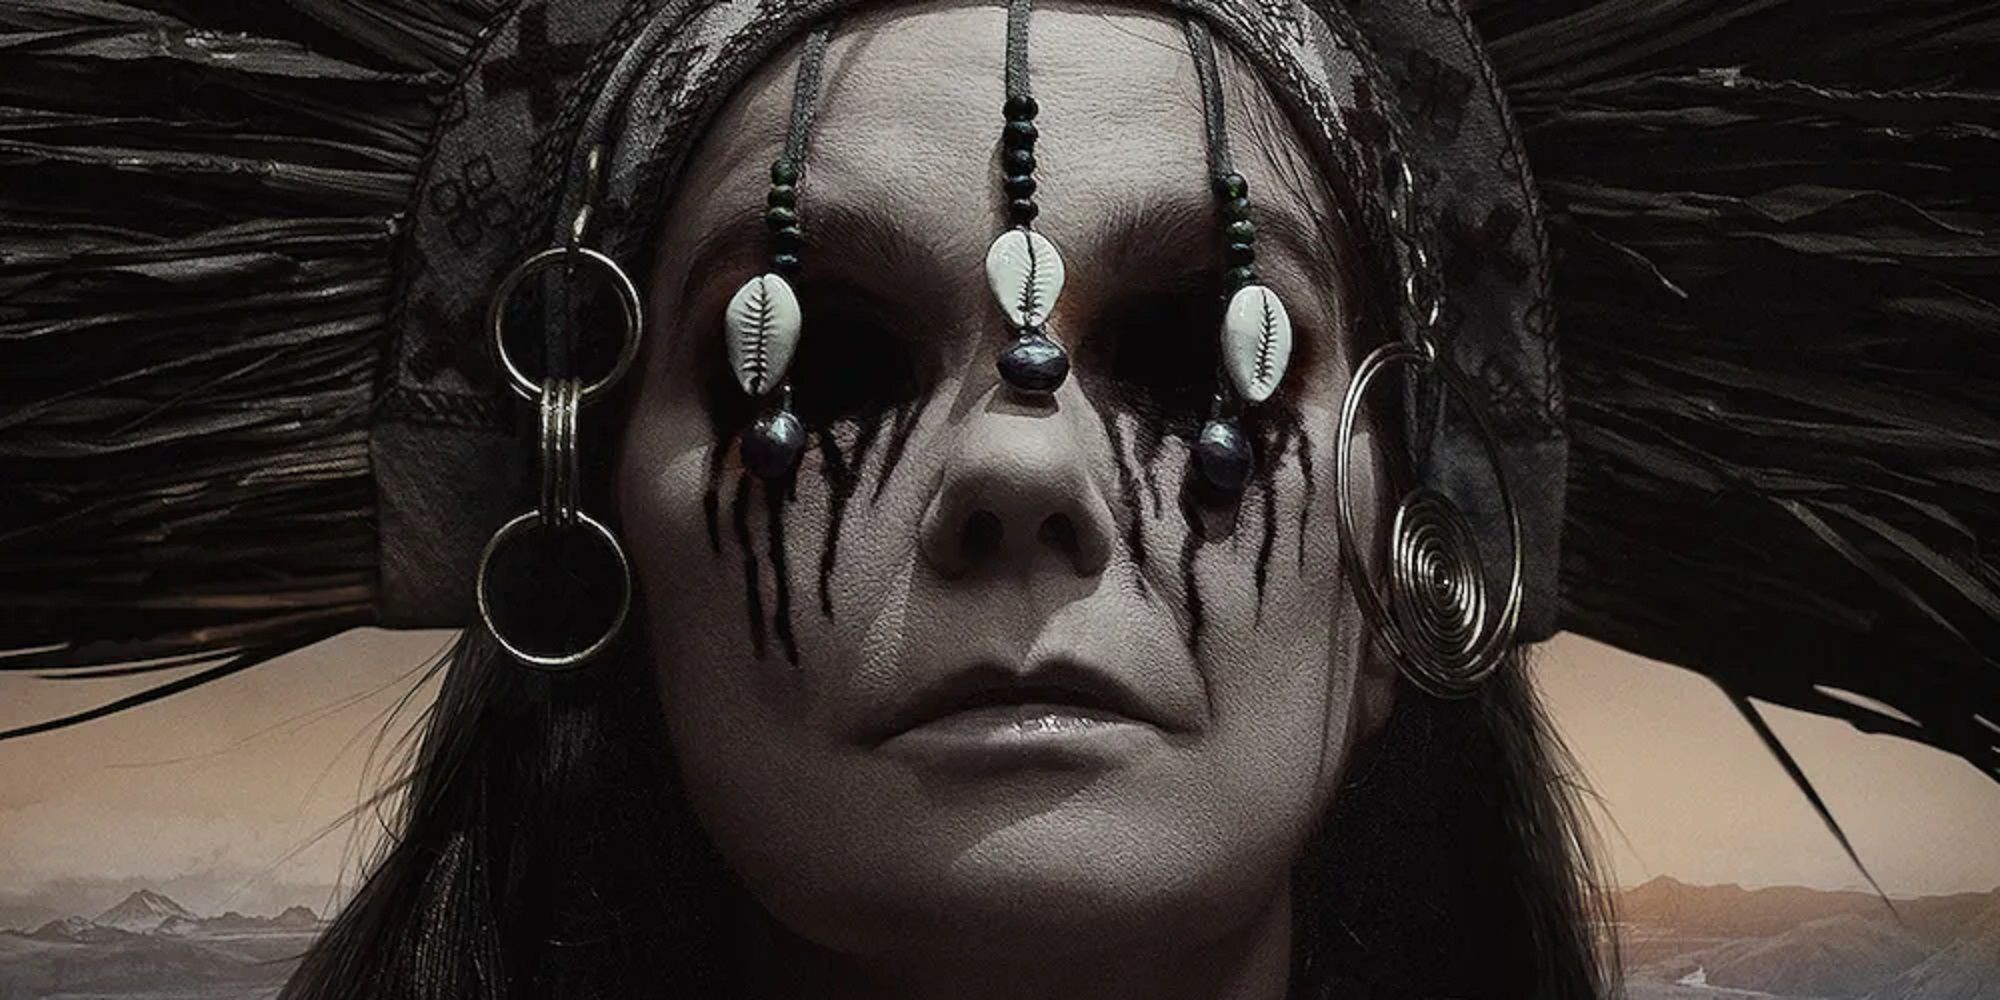 The Seeress in The Northman played by Bjork.